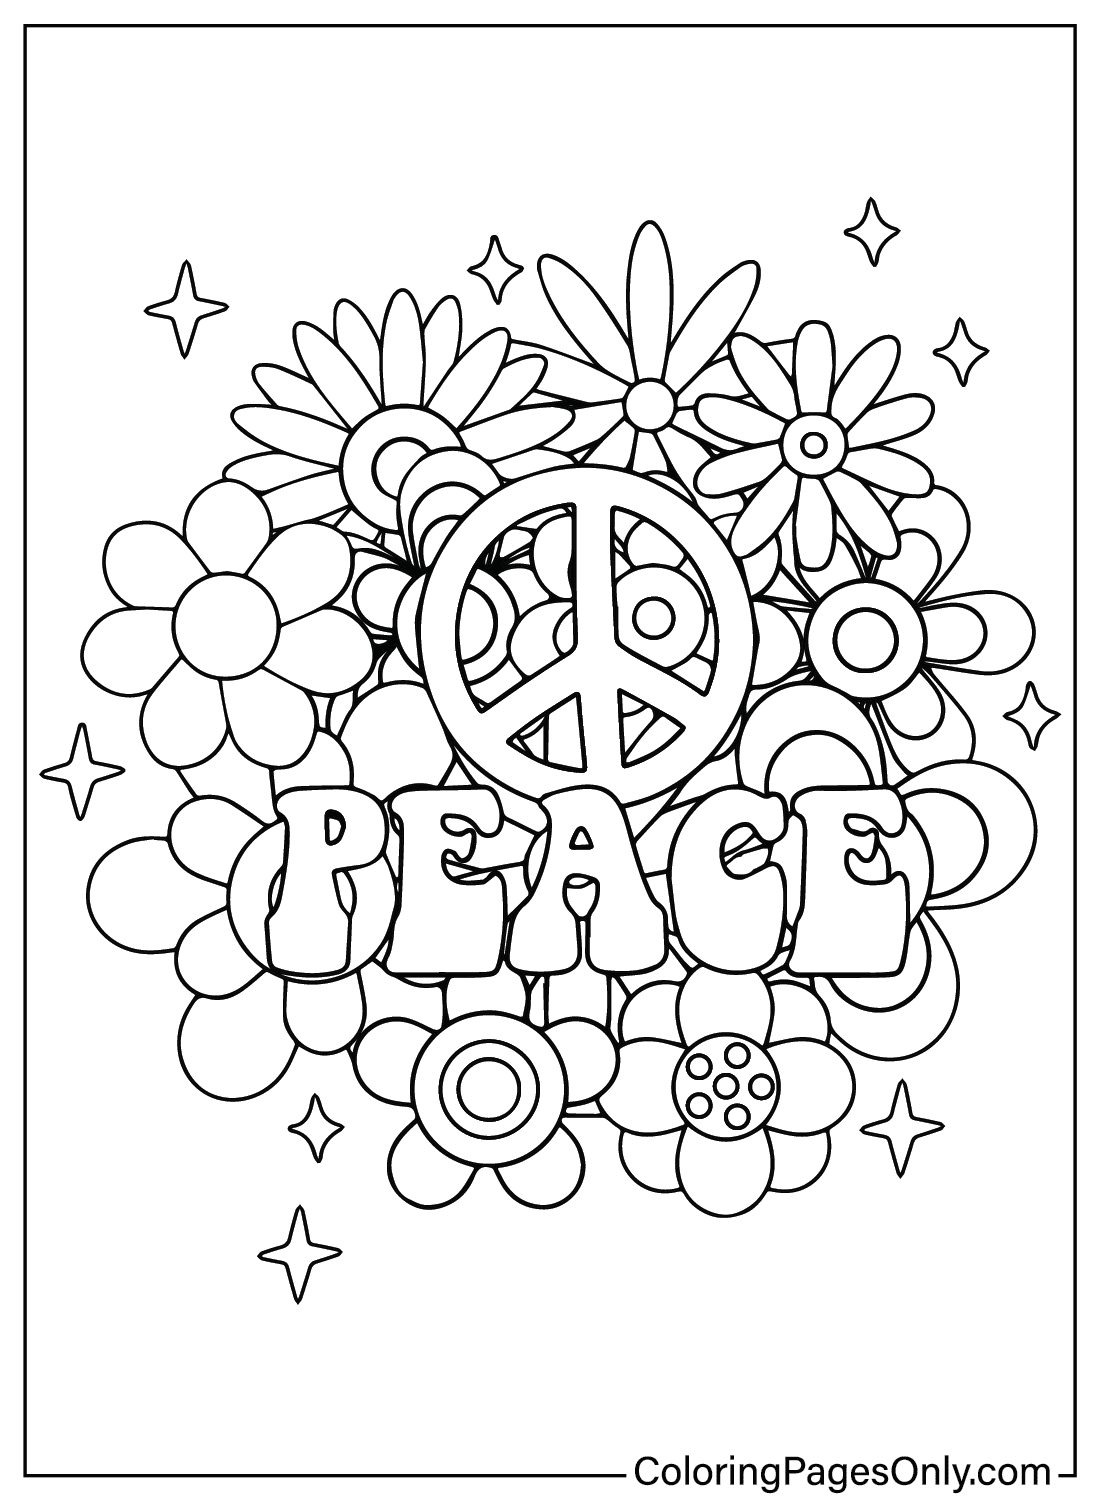 International day of peace coloring pages